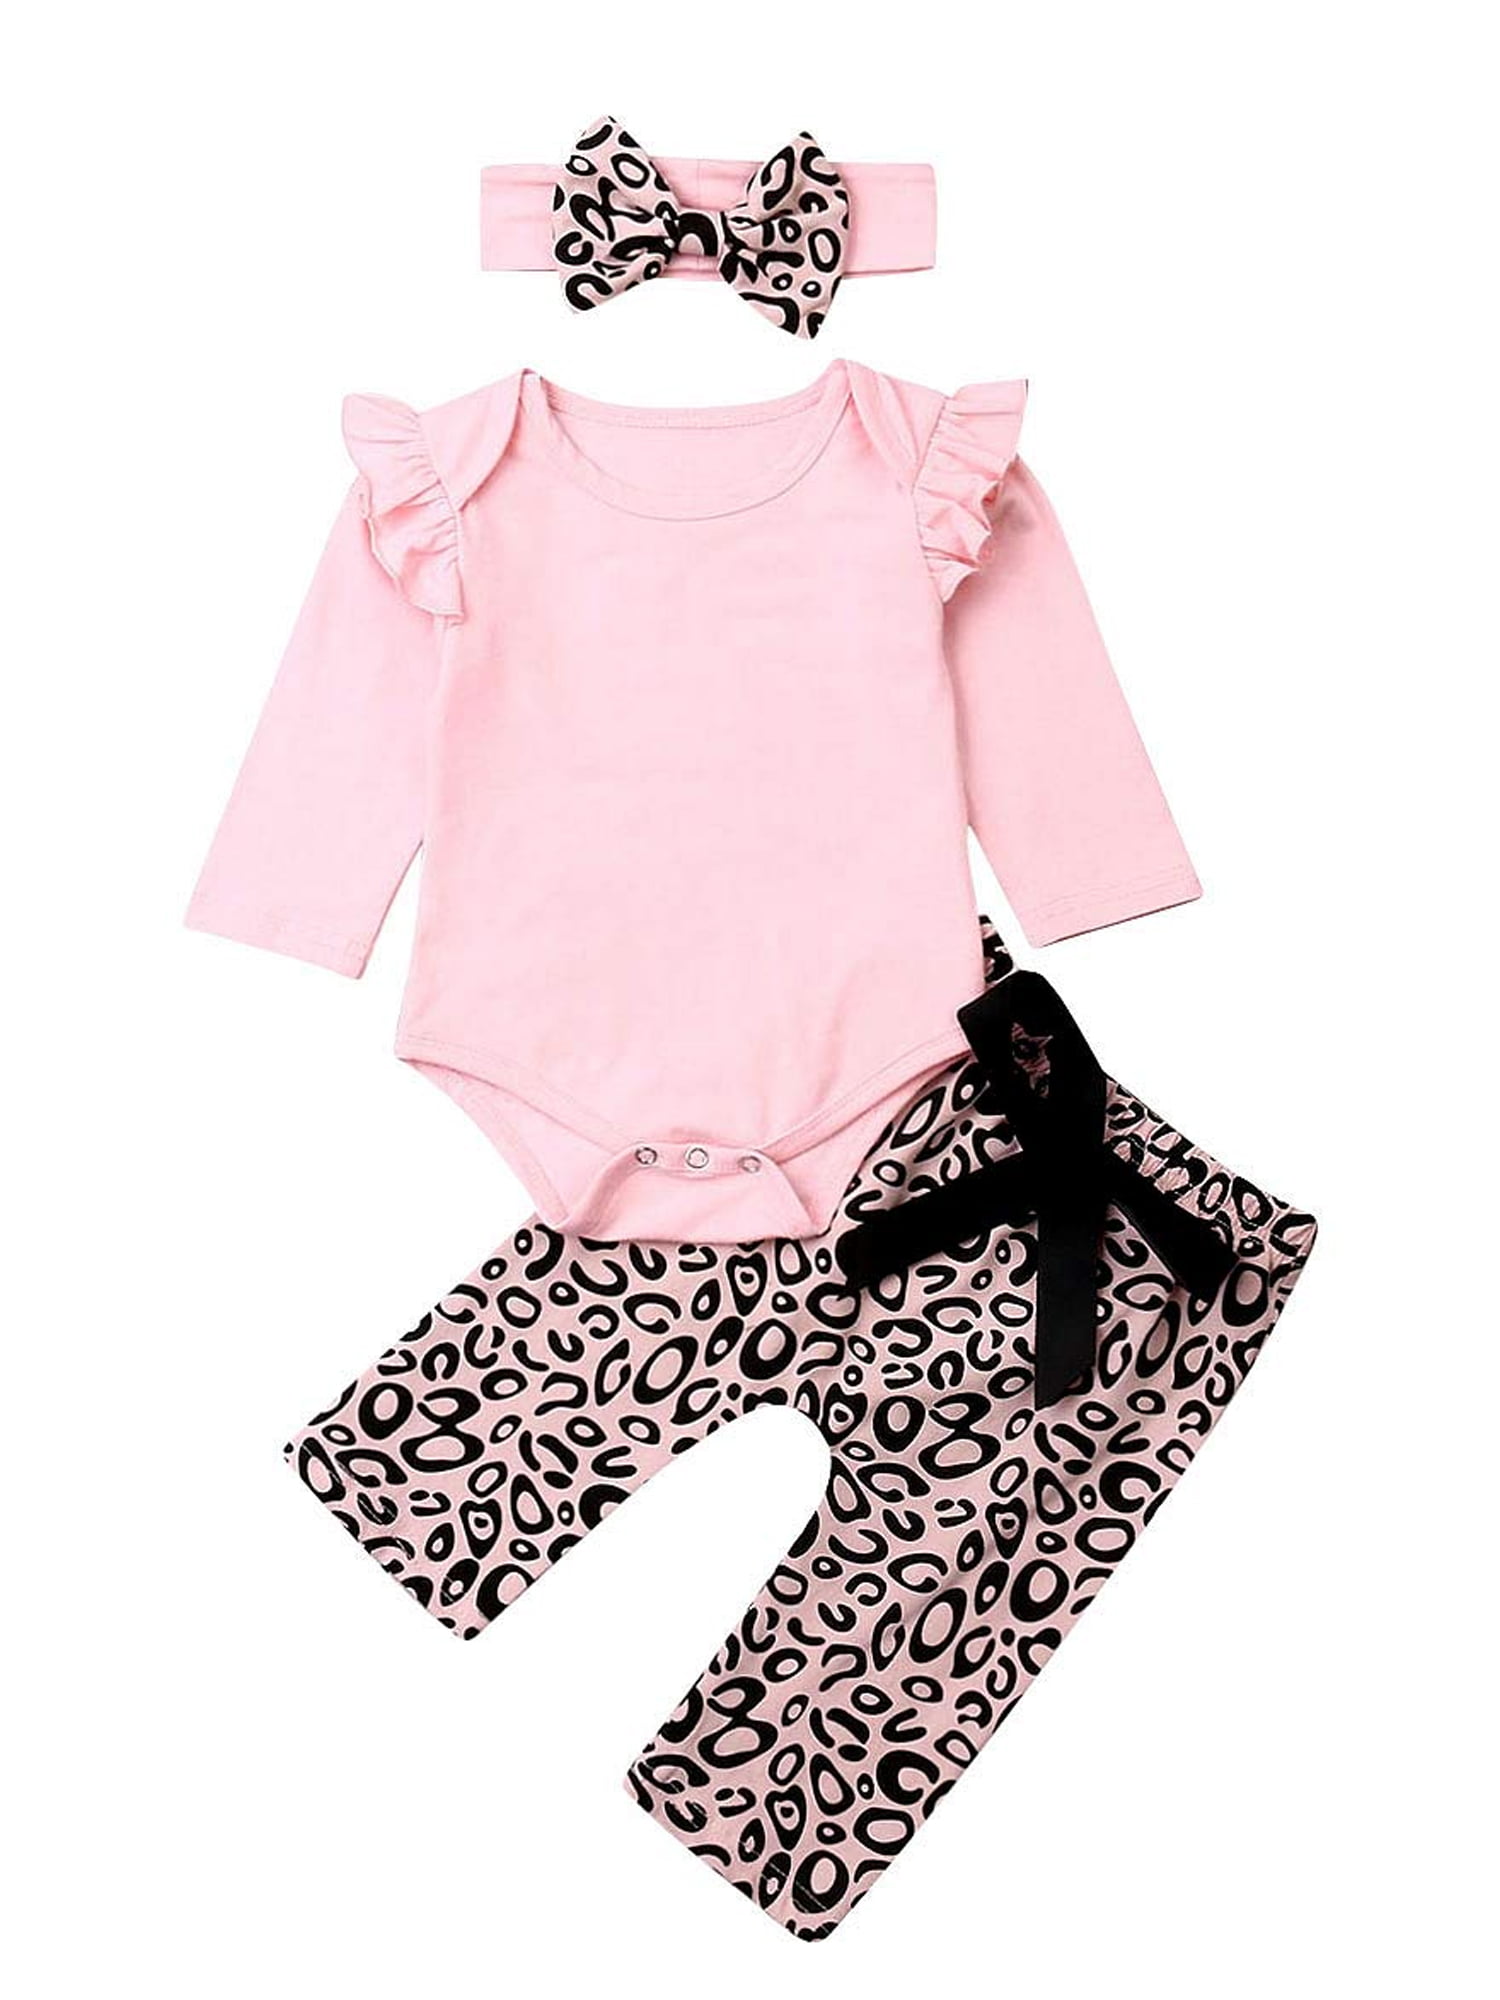 Infant Baby Girls 4 Piece Outfits Long Sleeve Letter Printed Romper Pants Heaadband Hat Set Fall Winter Clothes